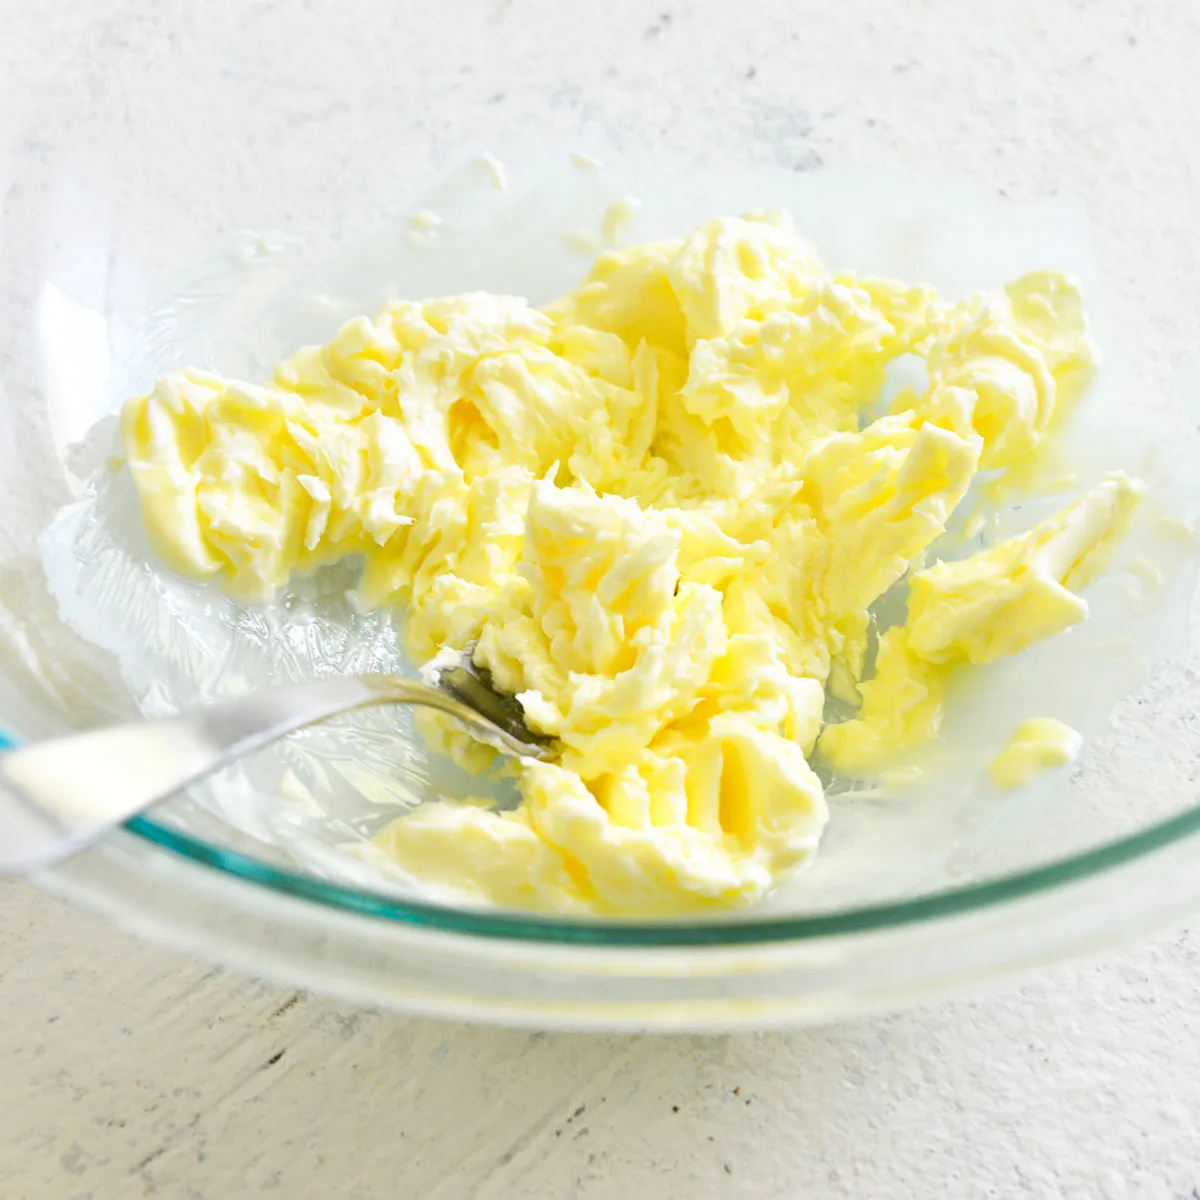 Mashed butter in a bowl